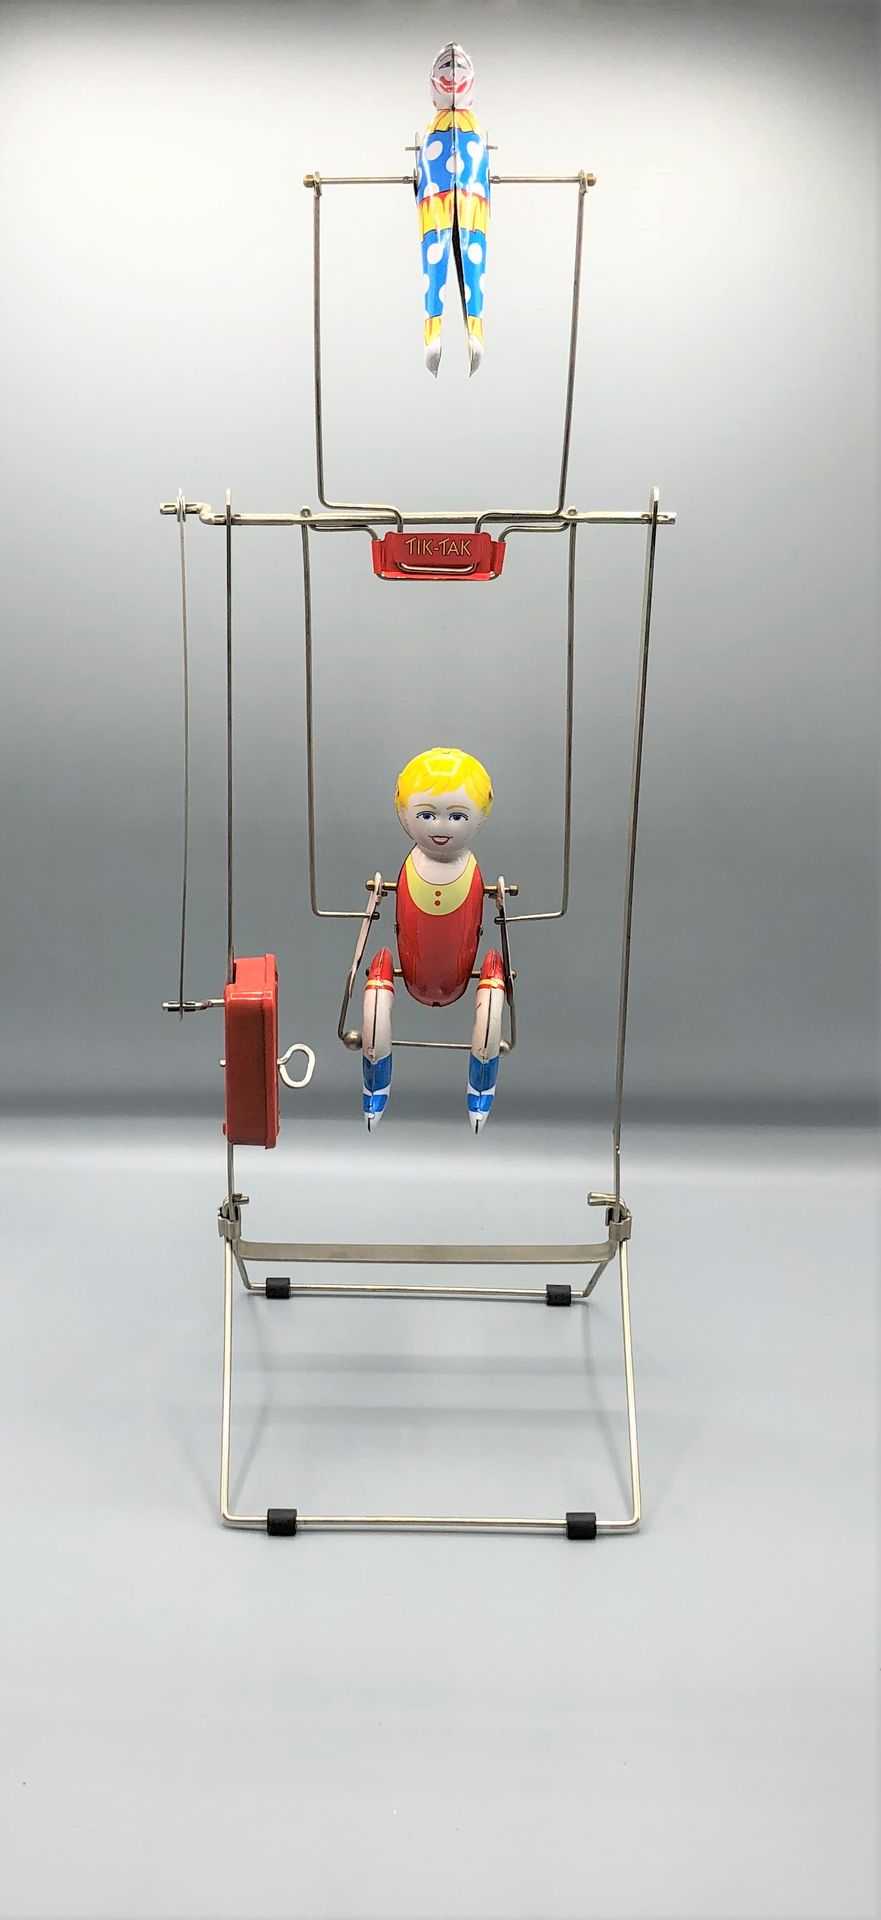 Null ACROBATES

Mechanical toy featuring two acrobats on an iron trapeze, doing &hellip;